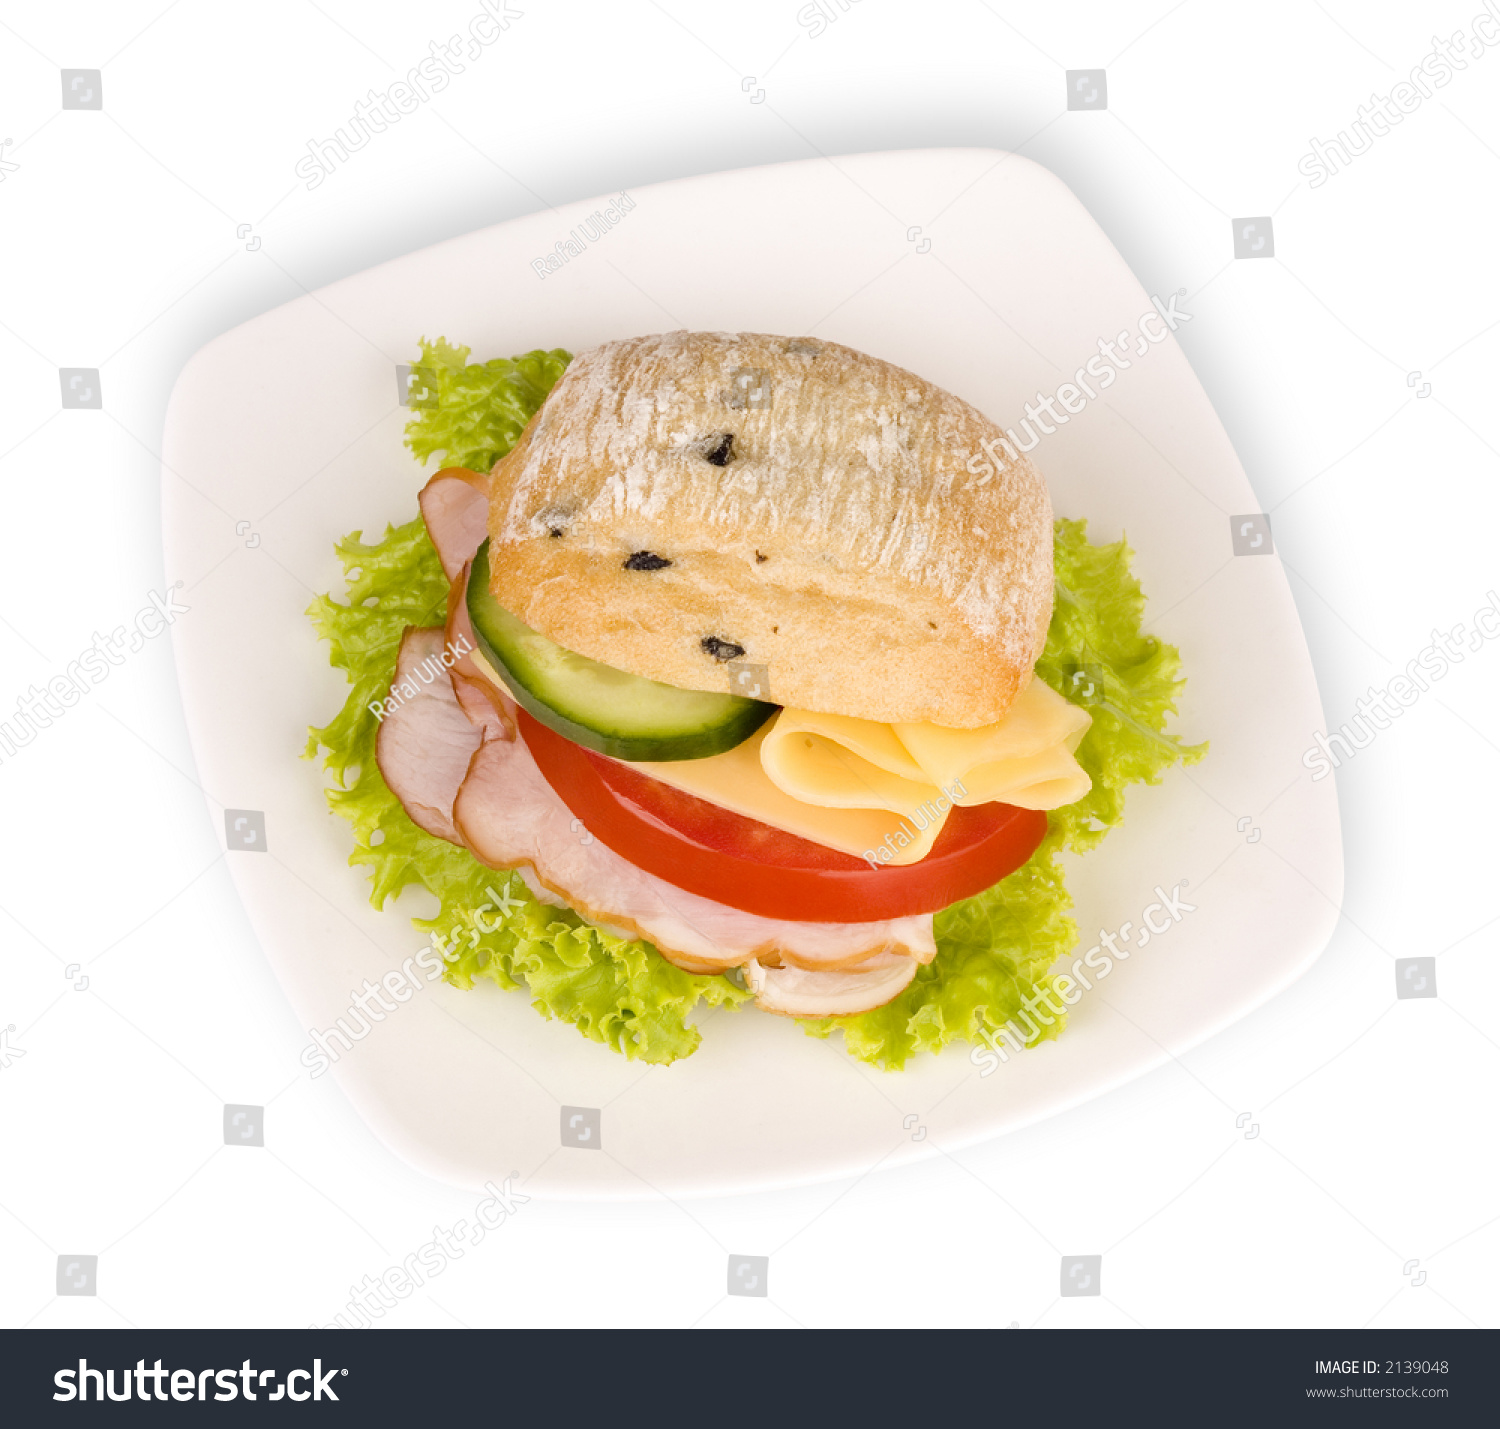 Sandwich On White Plate With Path On White Background Stock Photo ...